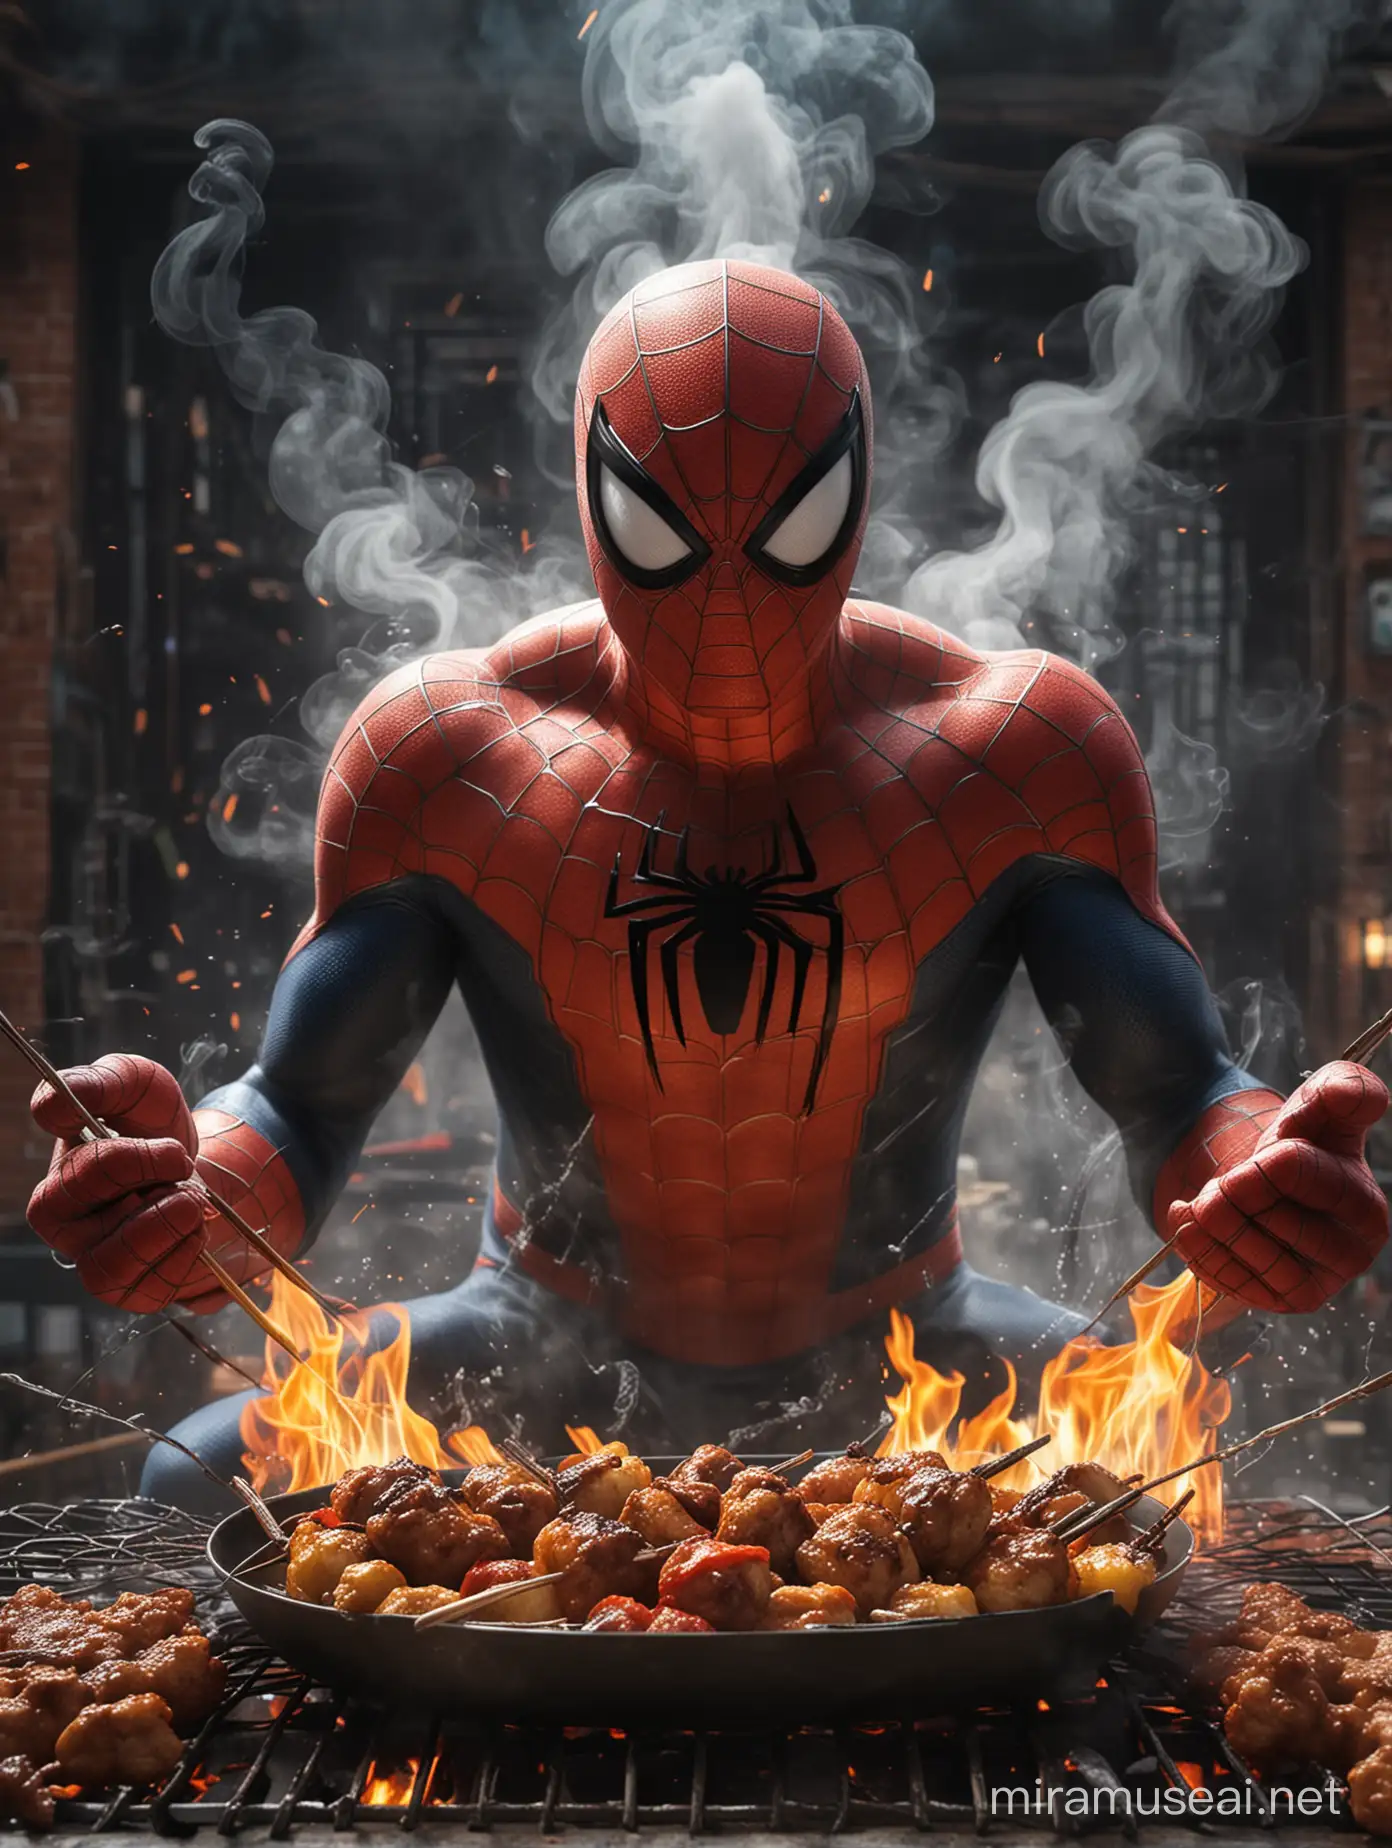 Create a film poster of 3d animation "Spiderman" is seen a grill and spiderman grilling satay with a dramatic smoke effect and also spider webs in the background, by maintaining the character of Spiderman, using costume and spiderman mask look a like as the original